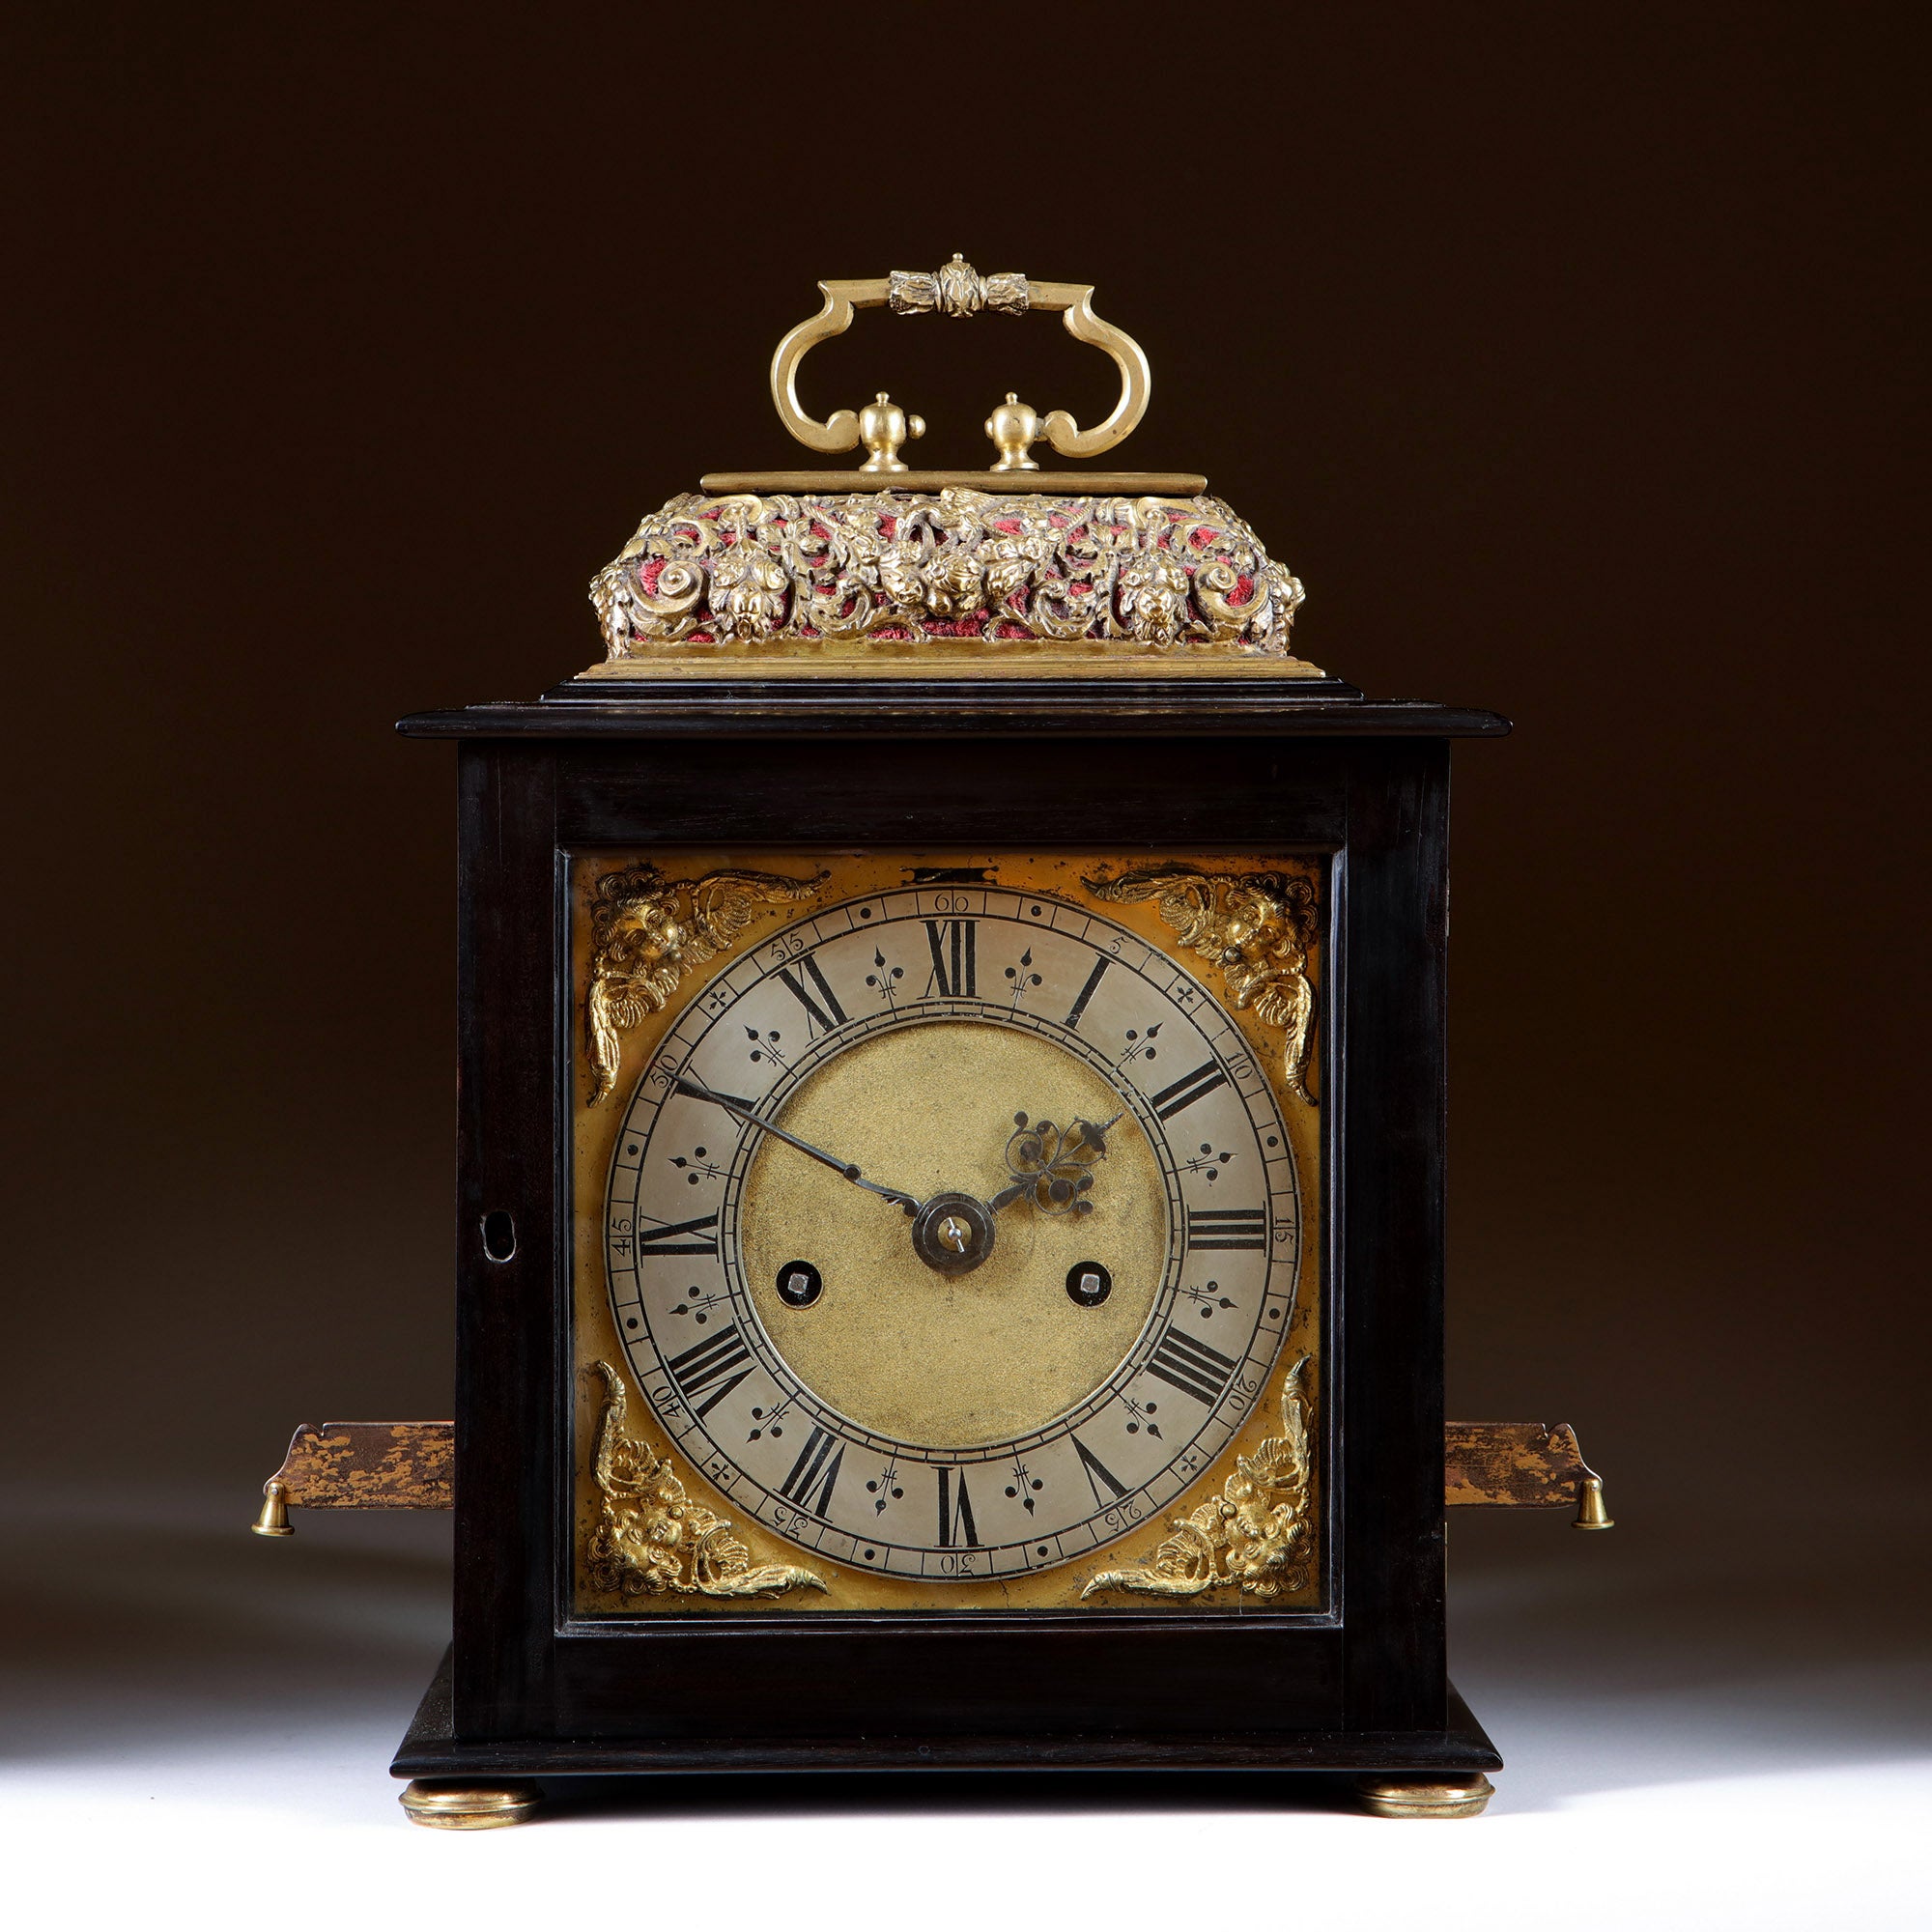 A Rare and Important Charles II 17th Century Table Clock by Henry Jones 1